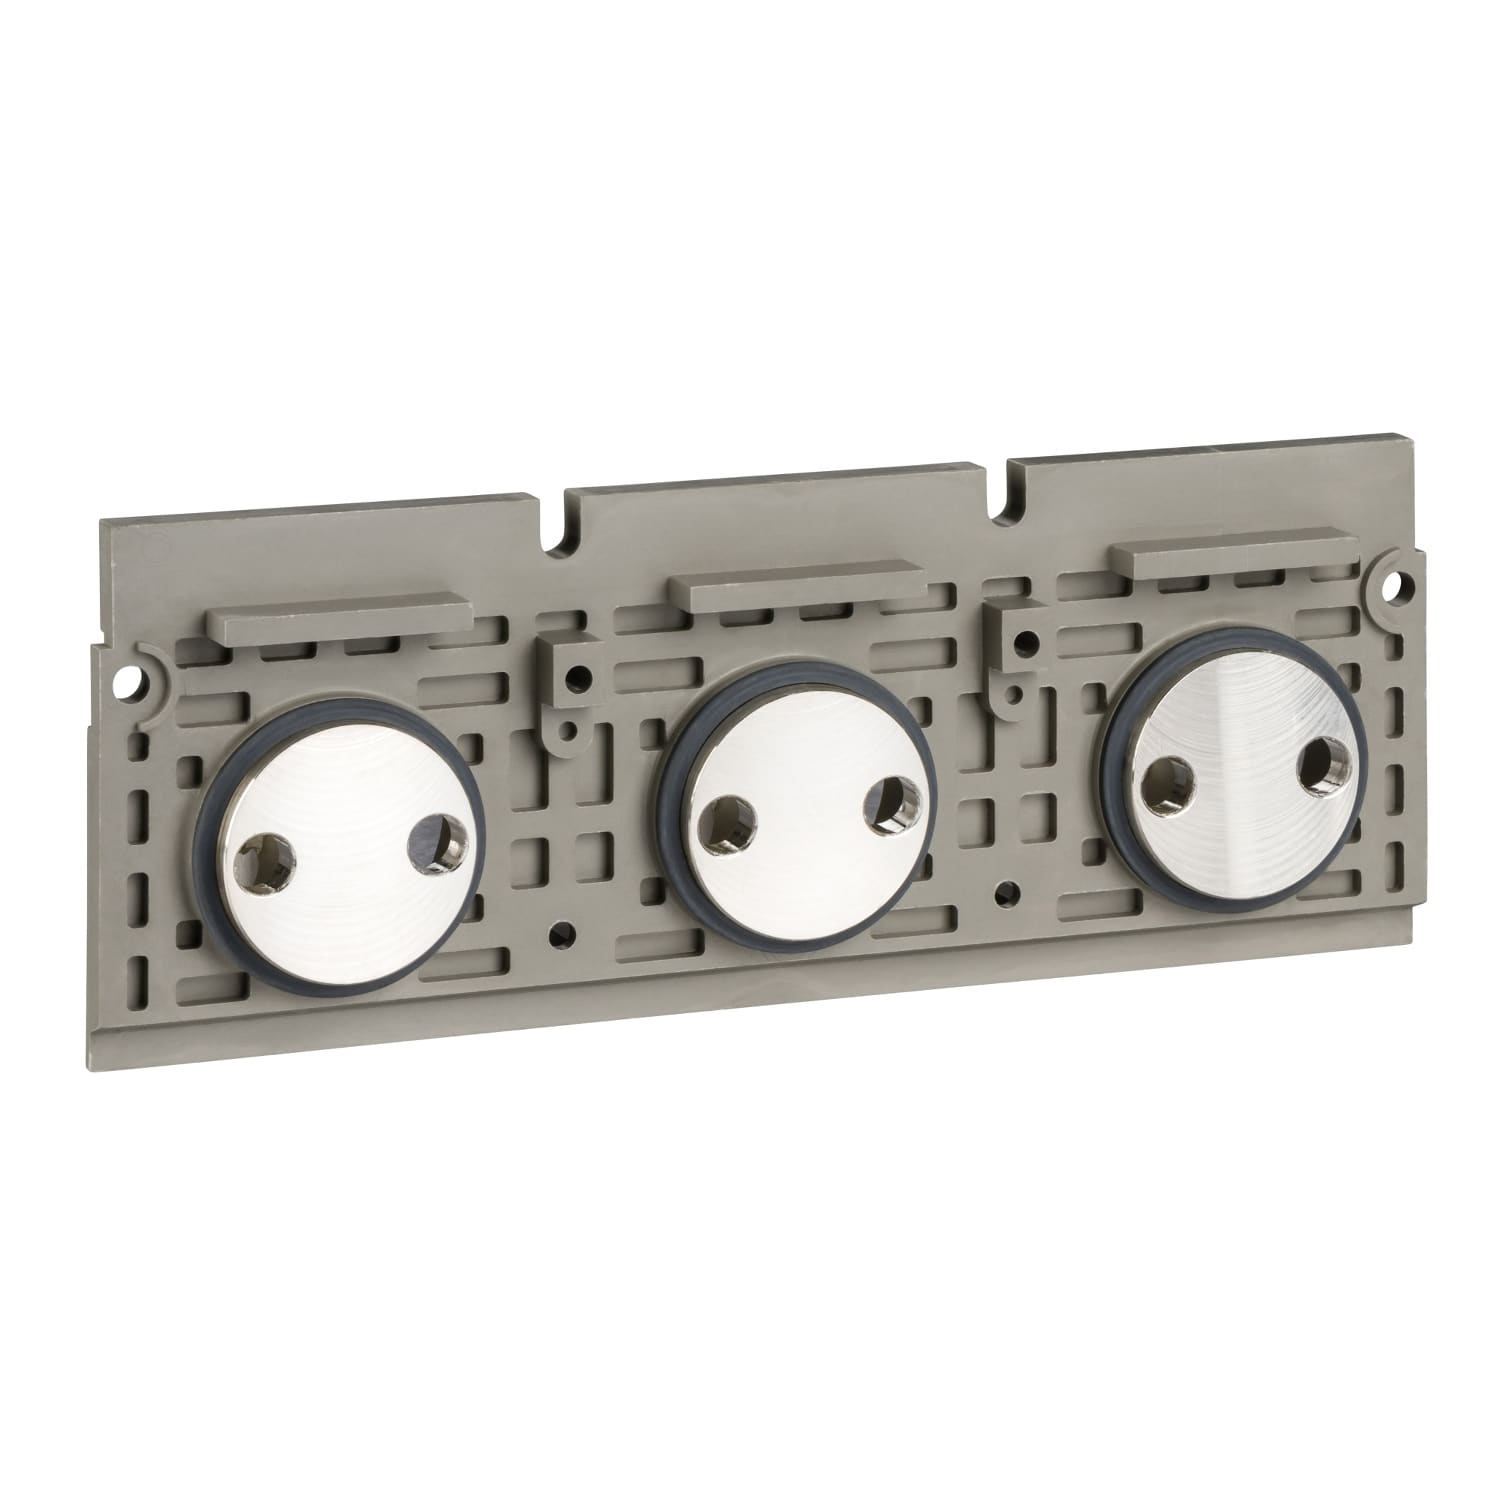 Schneider Electric - ComPacT NS - raccordement prise arriere vertical - amont - 3P - fixe - pr NS160